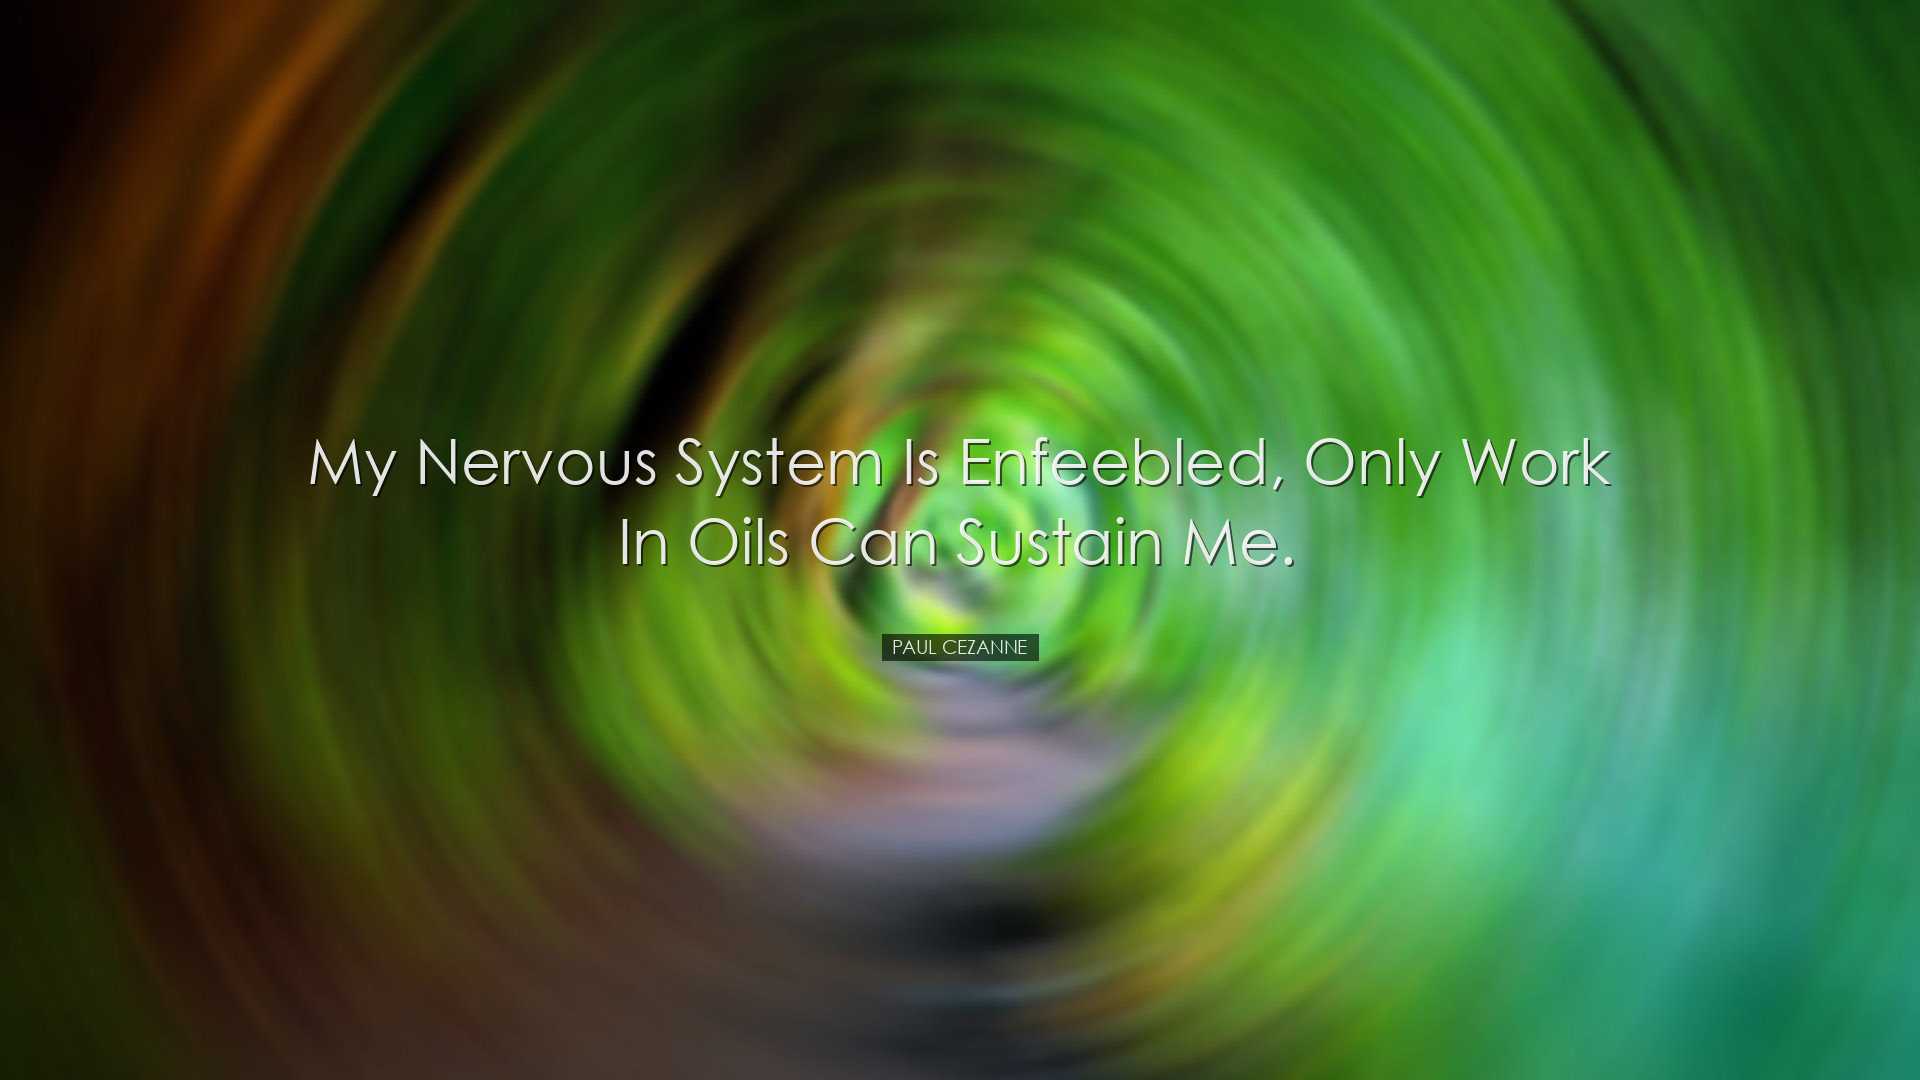 My nervous system is enfeebled, only work in oils can sustain me.